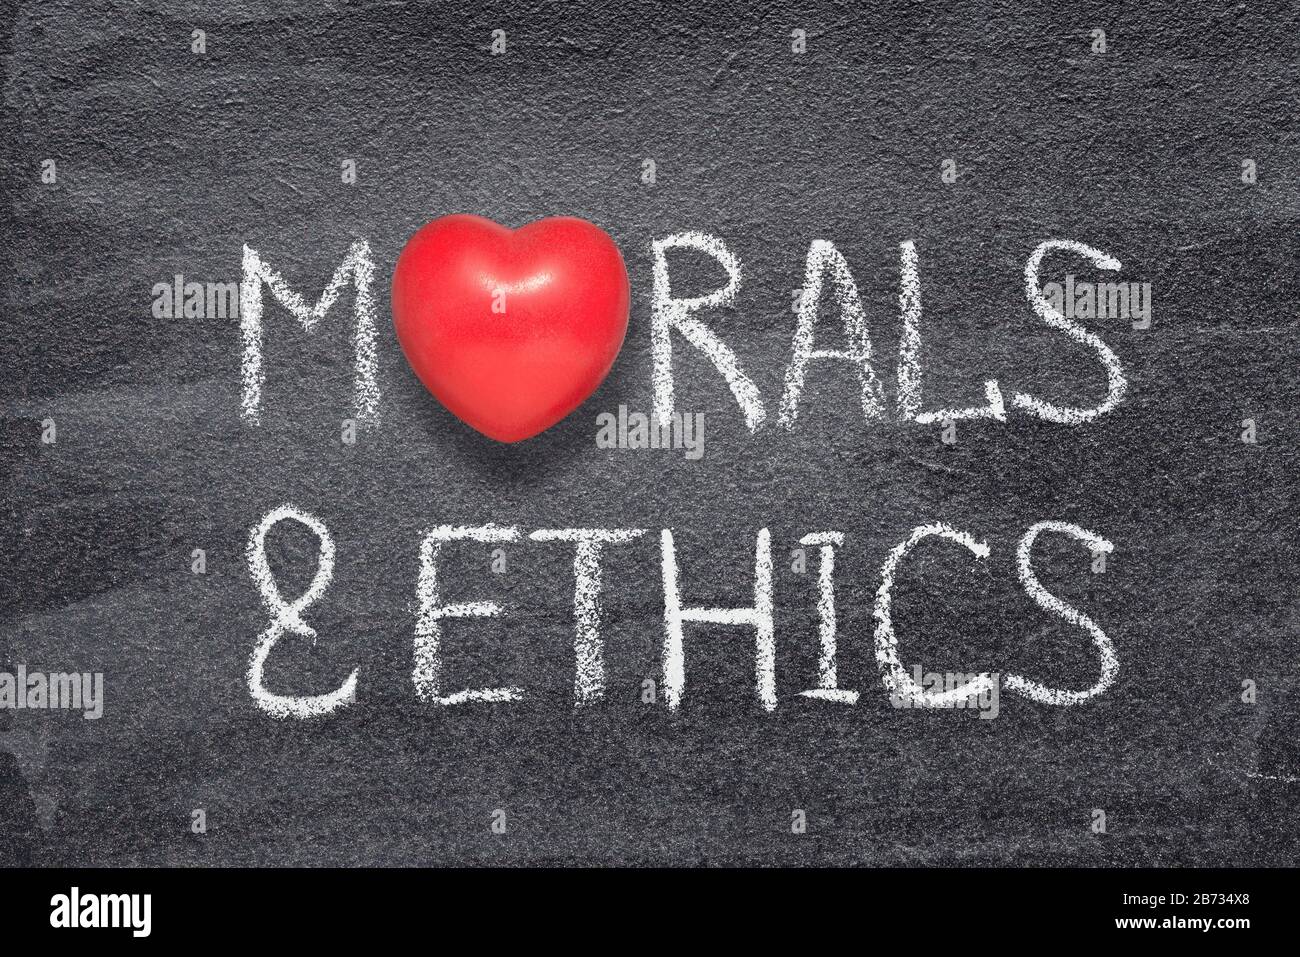 morals and ethics phrase written on chalkboard with red heart symbol instead of O Stock Photo